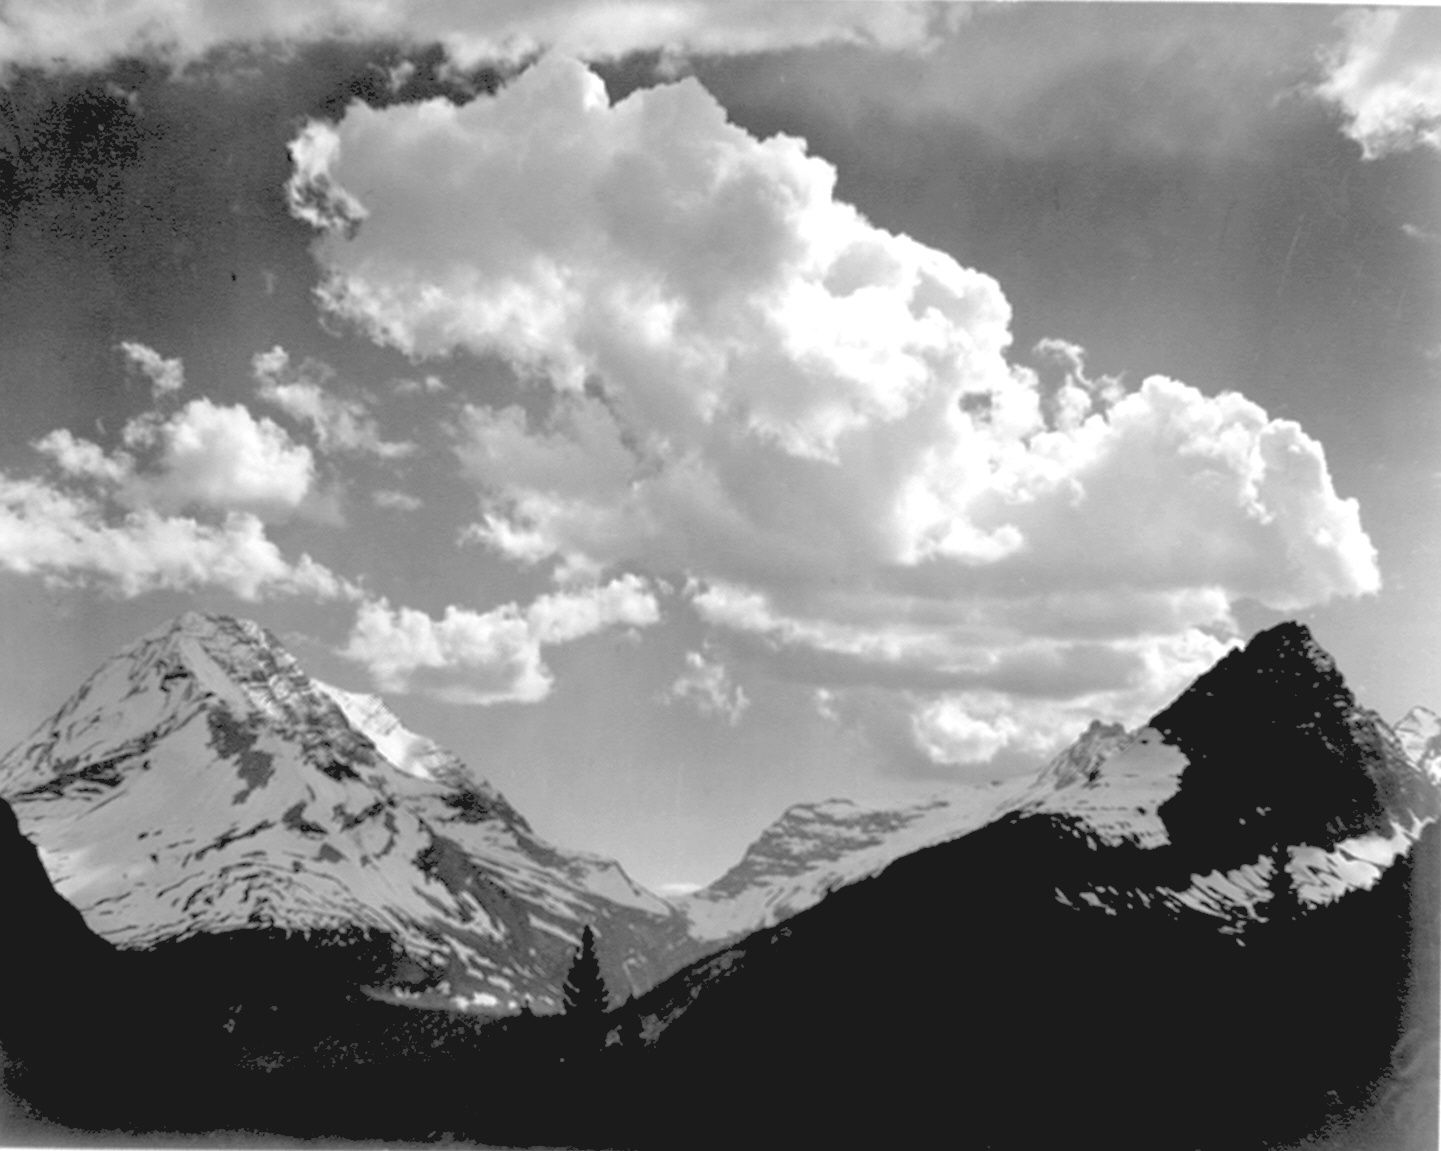 These stunning Ansel Adams photographs show the great outdoors in all its glory image 155